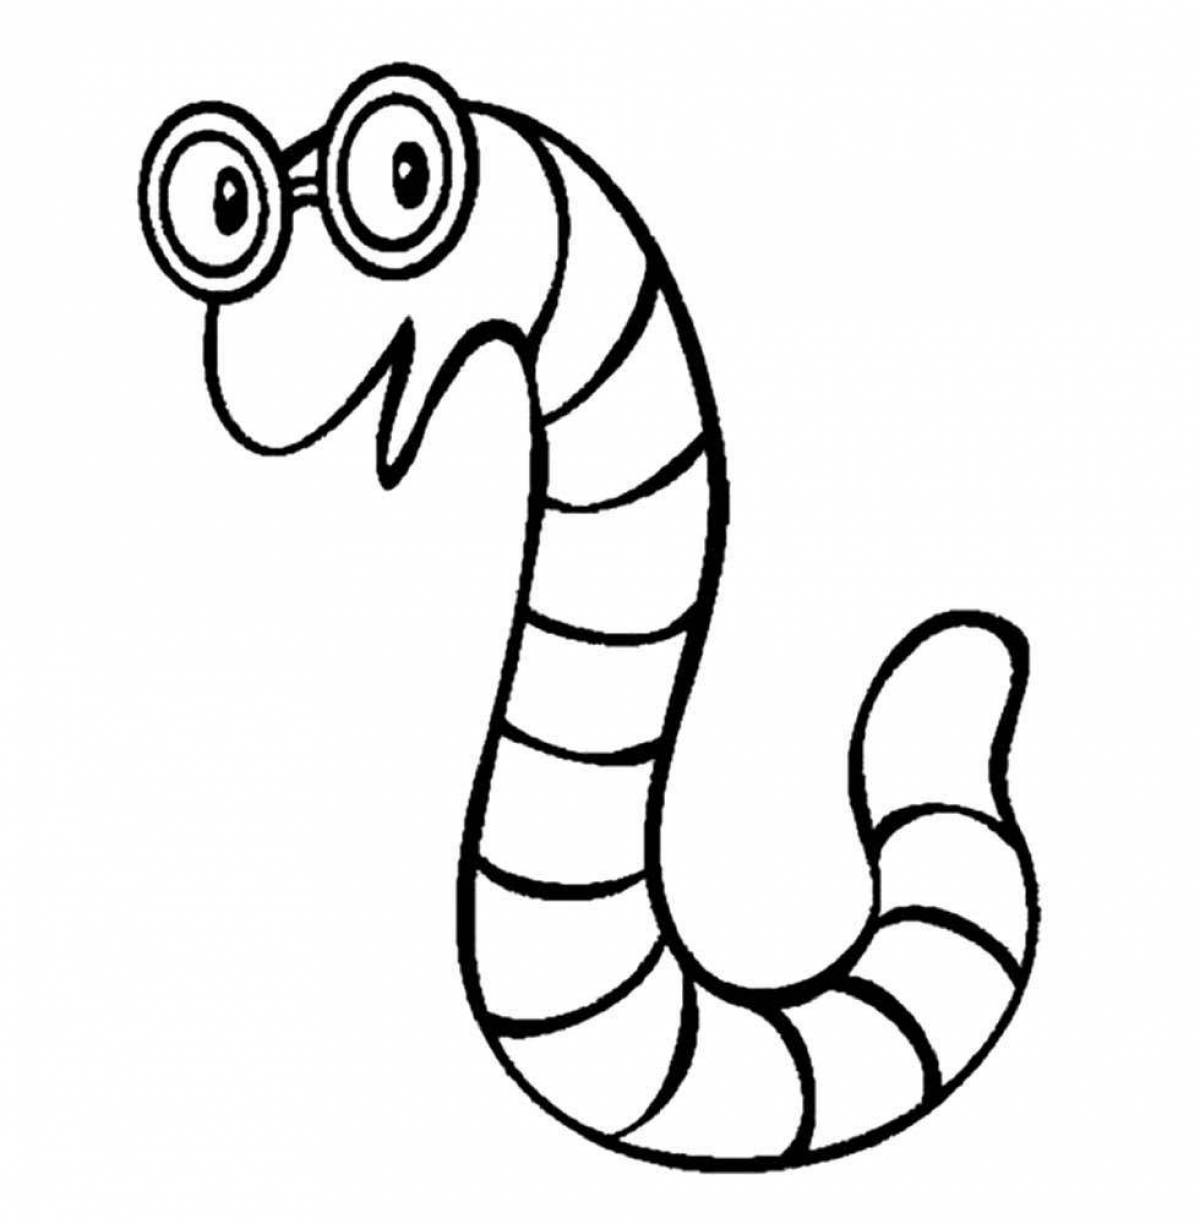 Fun worm coloring for kids